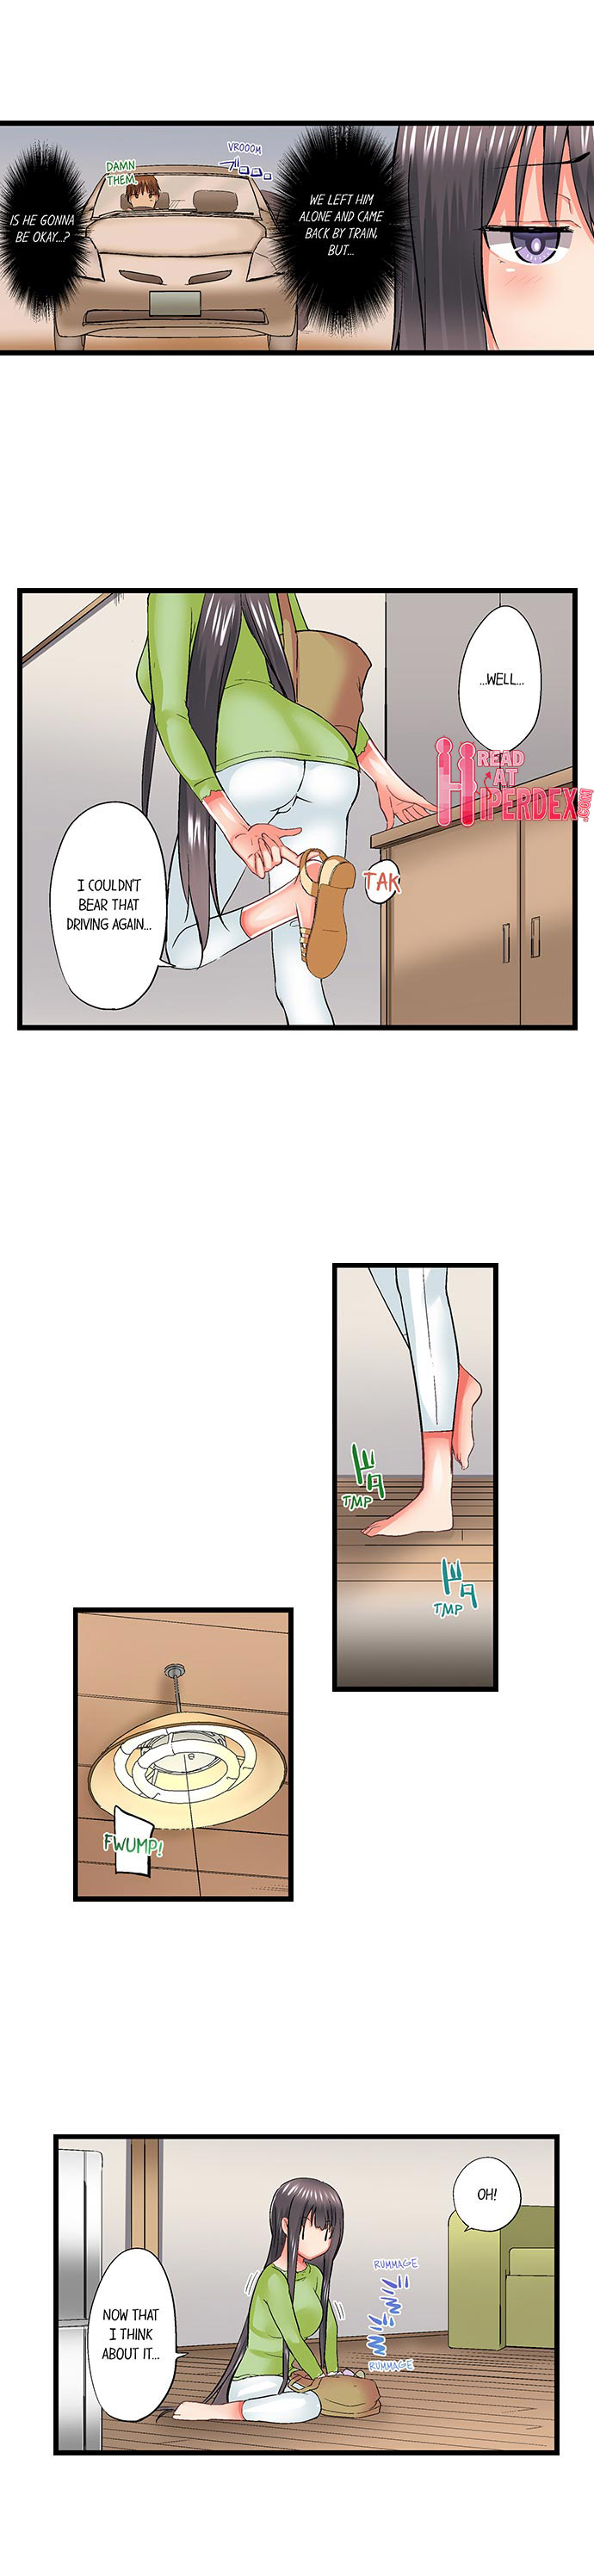 My Brother’s Slipped Inside Me in The Bathtub - Chapter 61 Page 3